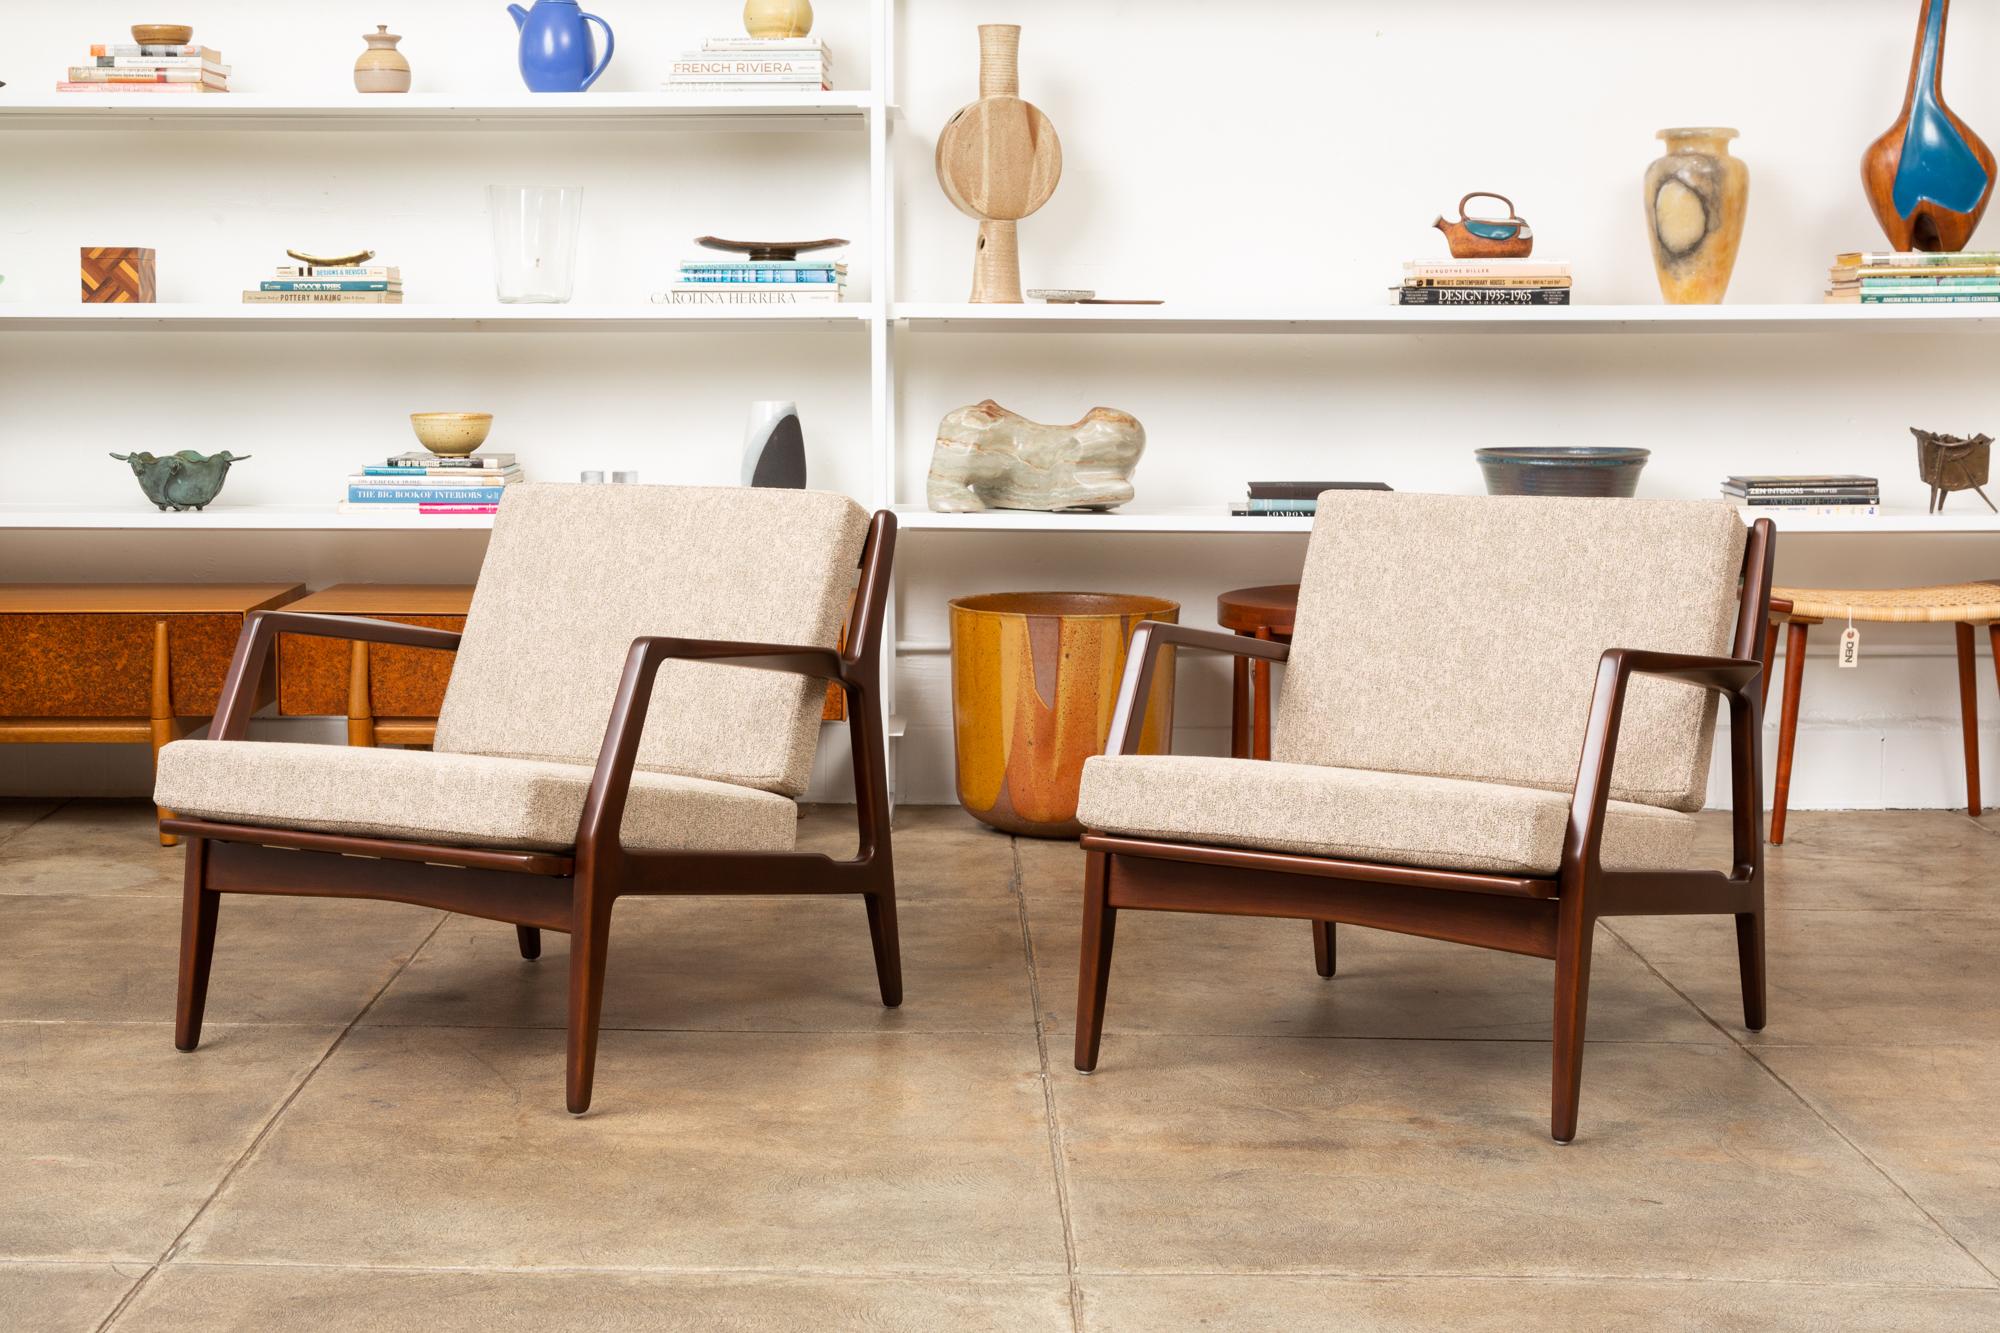 Pair of Model 41 easy chairs by Ib Kofod-Larsen for Magnus Olsen, Denmark c.1950. These chairs were imported for the American market by Selig. The body is constructed of stained beech, with sculpted arms and a slatted back. The cushions are newly